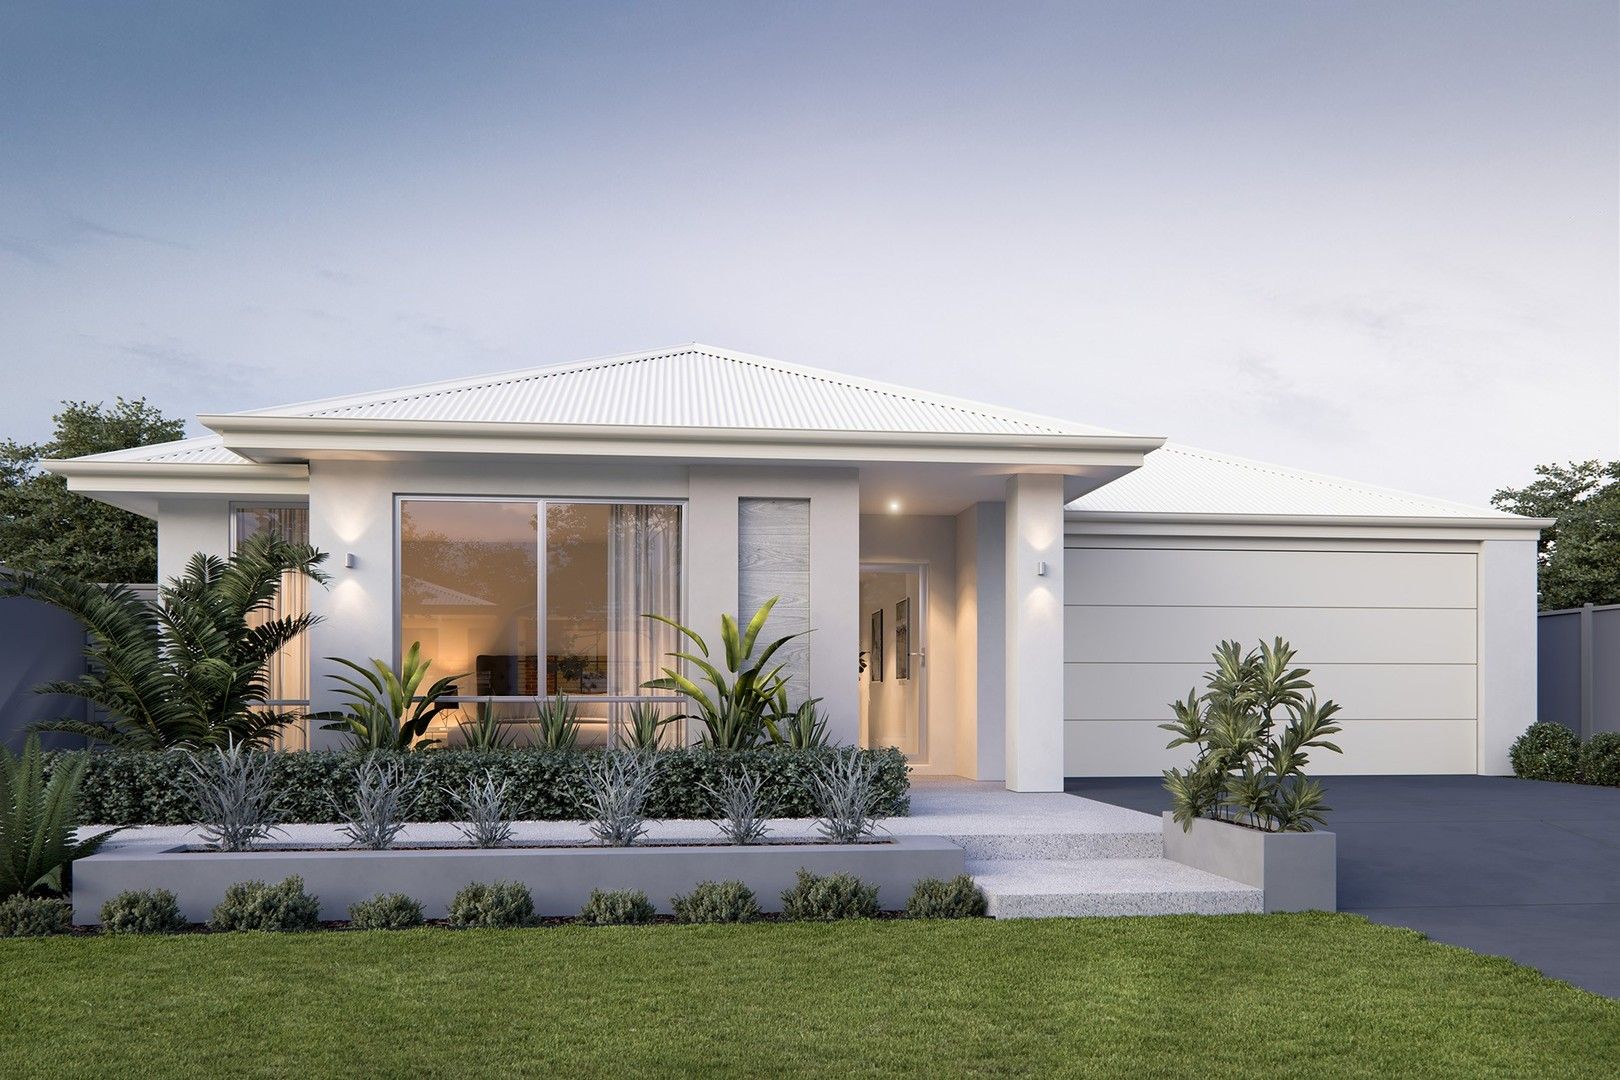 4 bedrooms New House & Land in Lot 2246 Avoca Chase (James Robinson) BALDIVIS WA, 6171